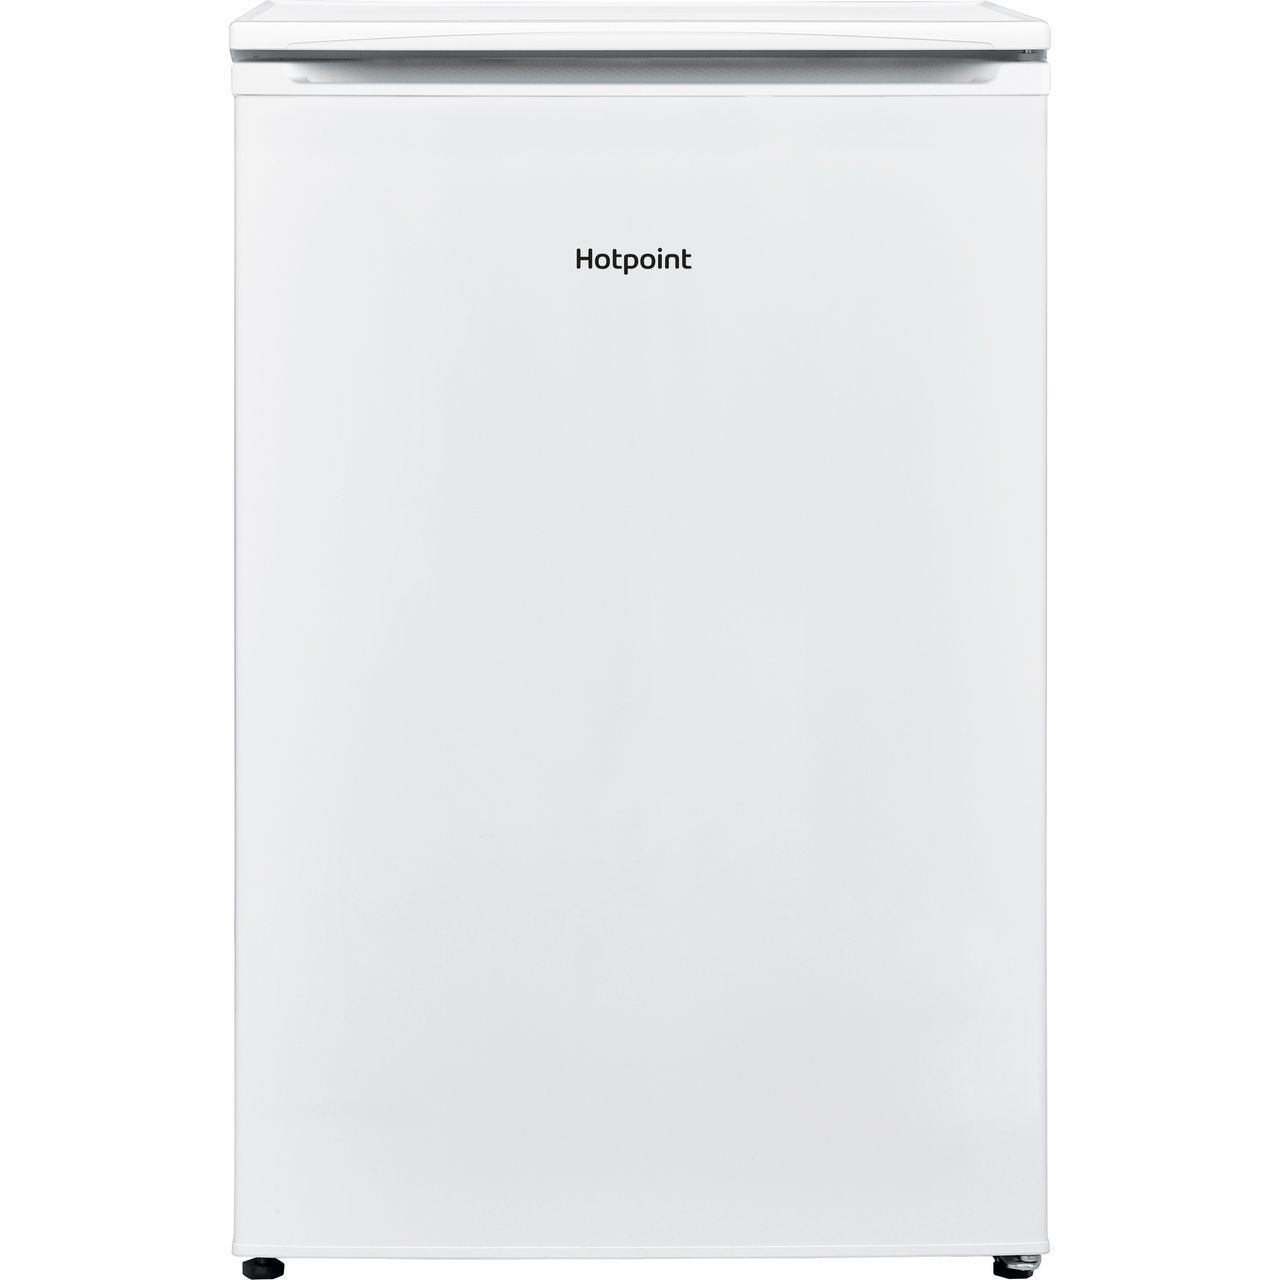 Hotpoint H55ZM1110WUK Under Counter Freezer Review